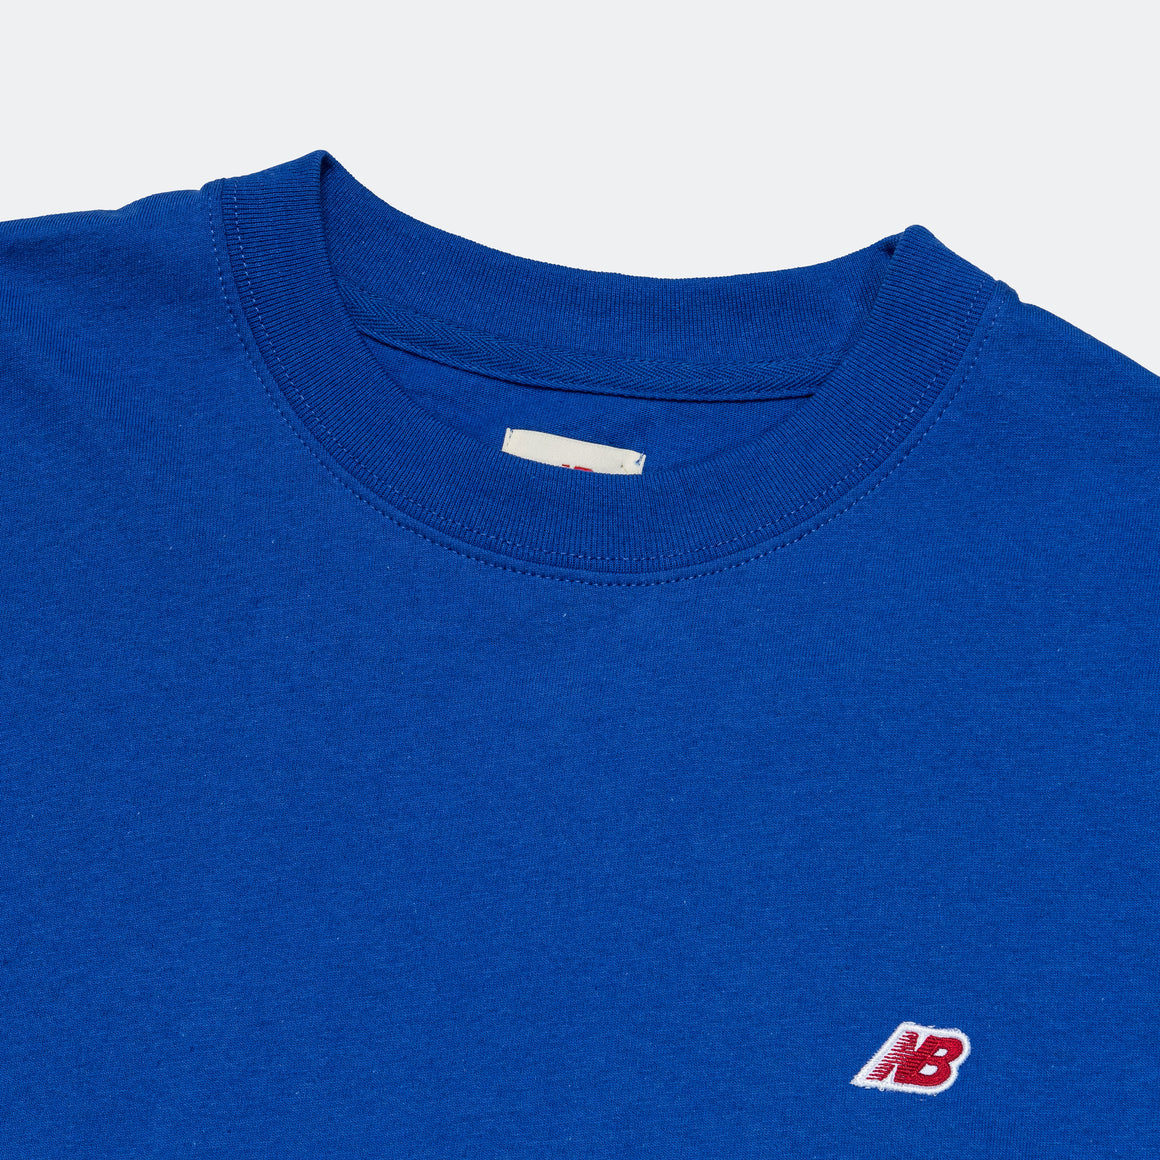 New Balance - MADE in USA Short Sleeve Tee - Royal Blue - UP THERE